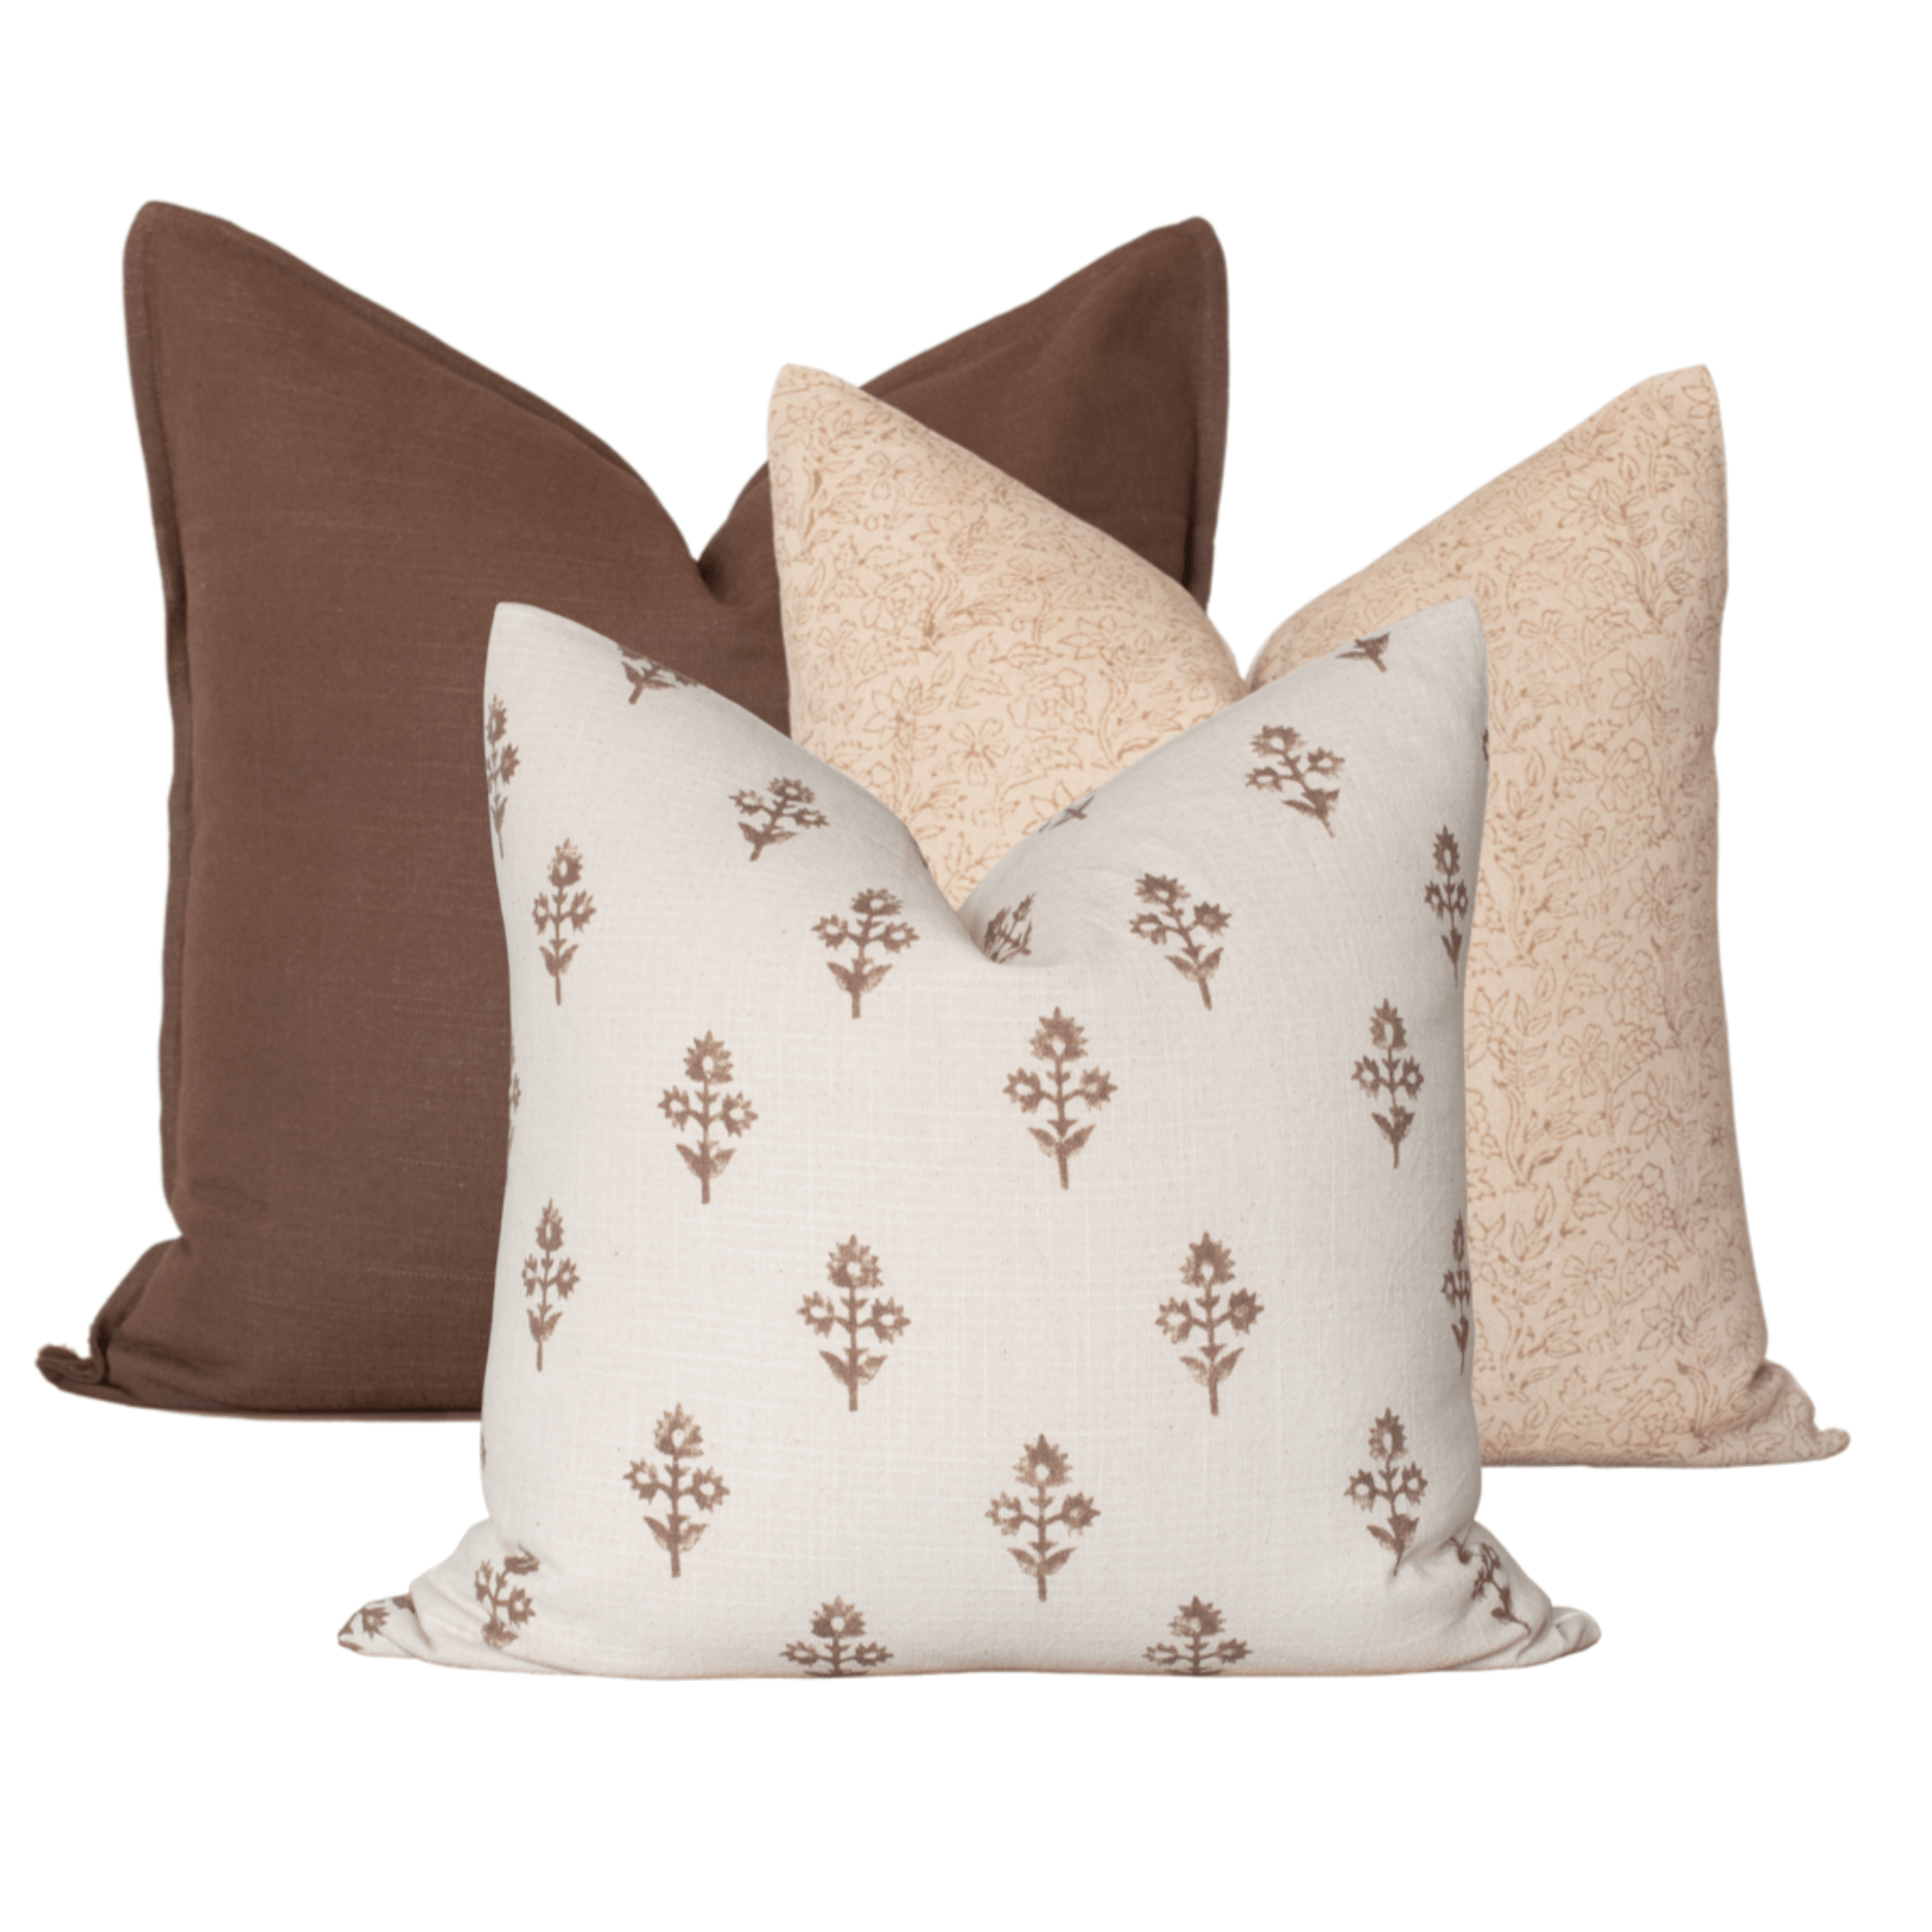 Solid and Floral Pillow Combos